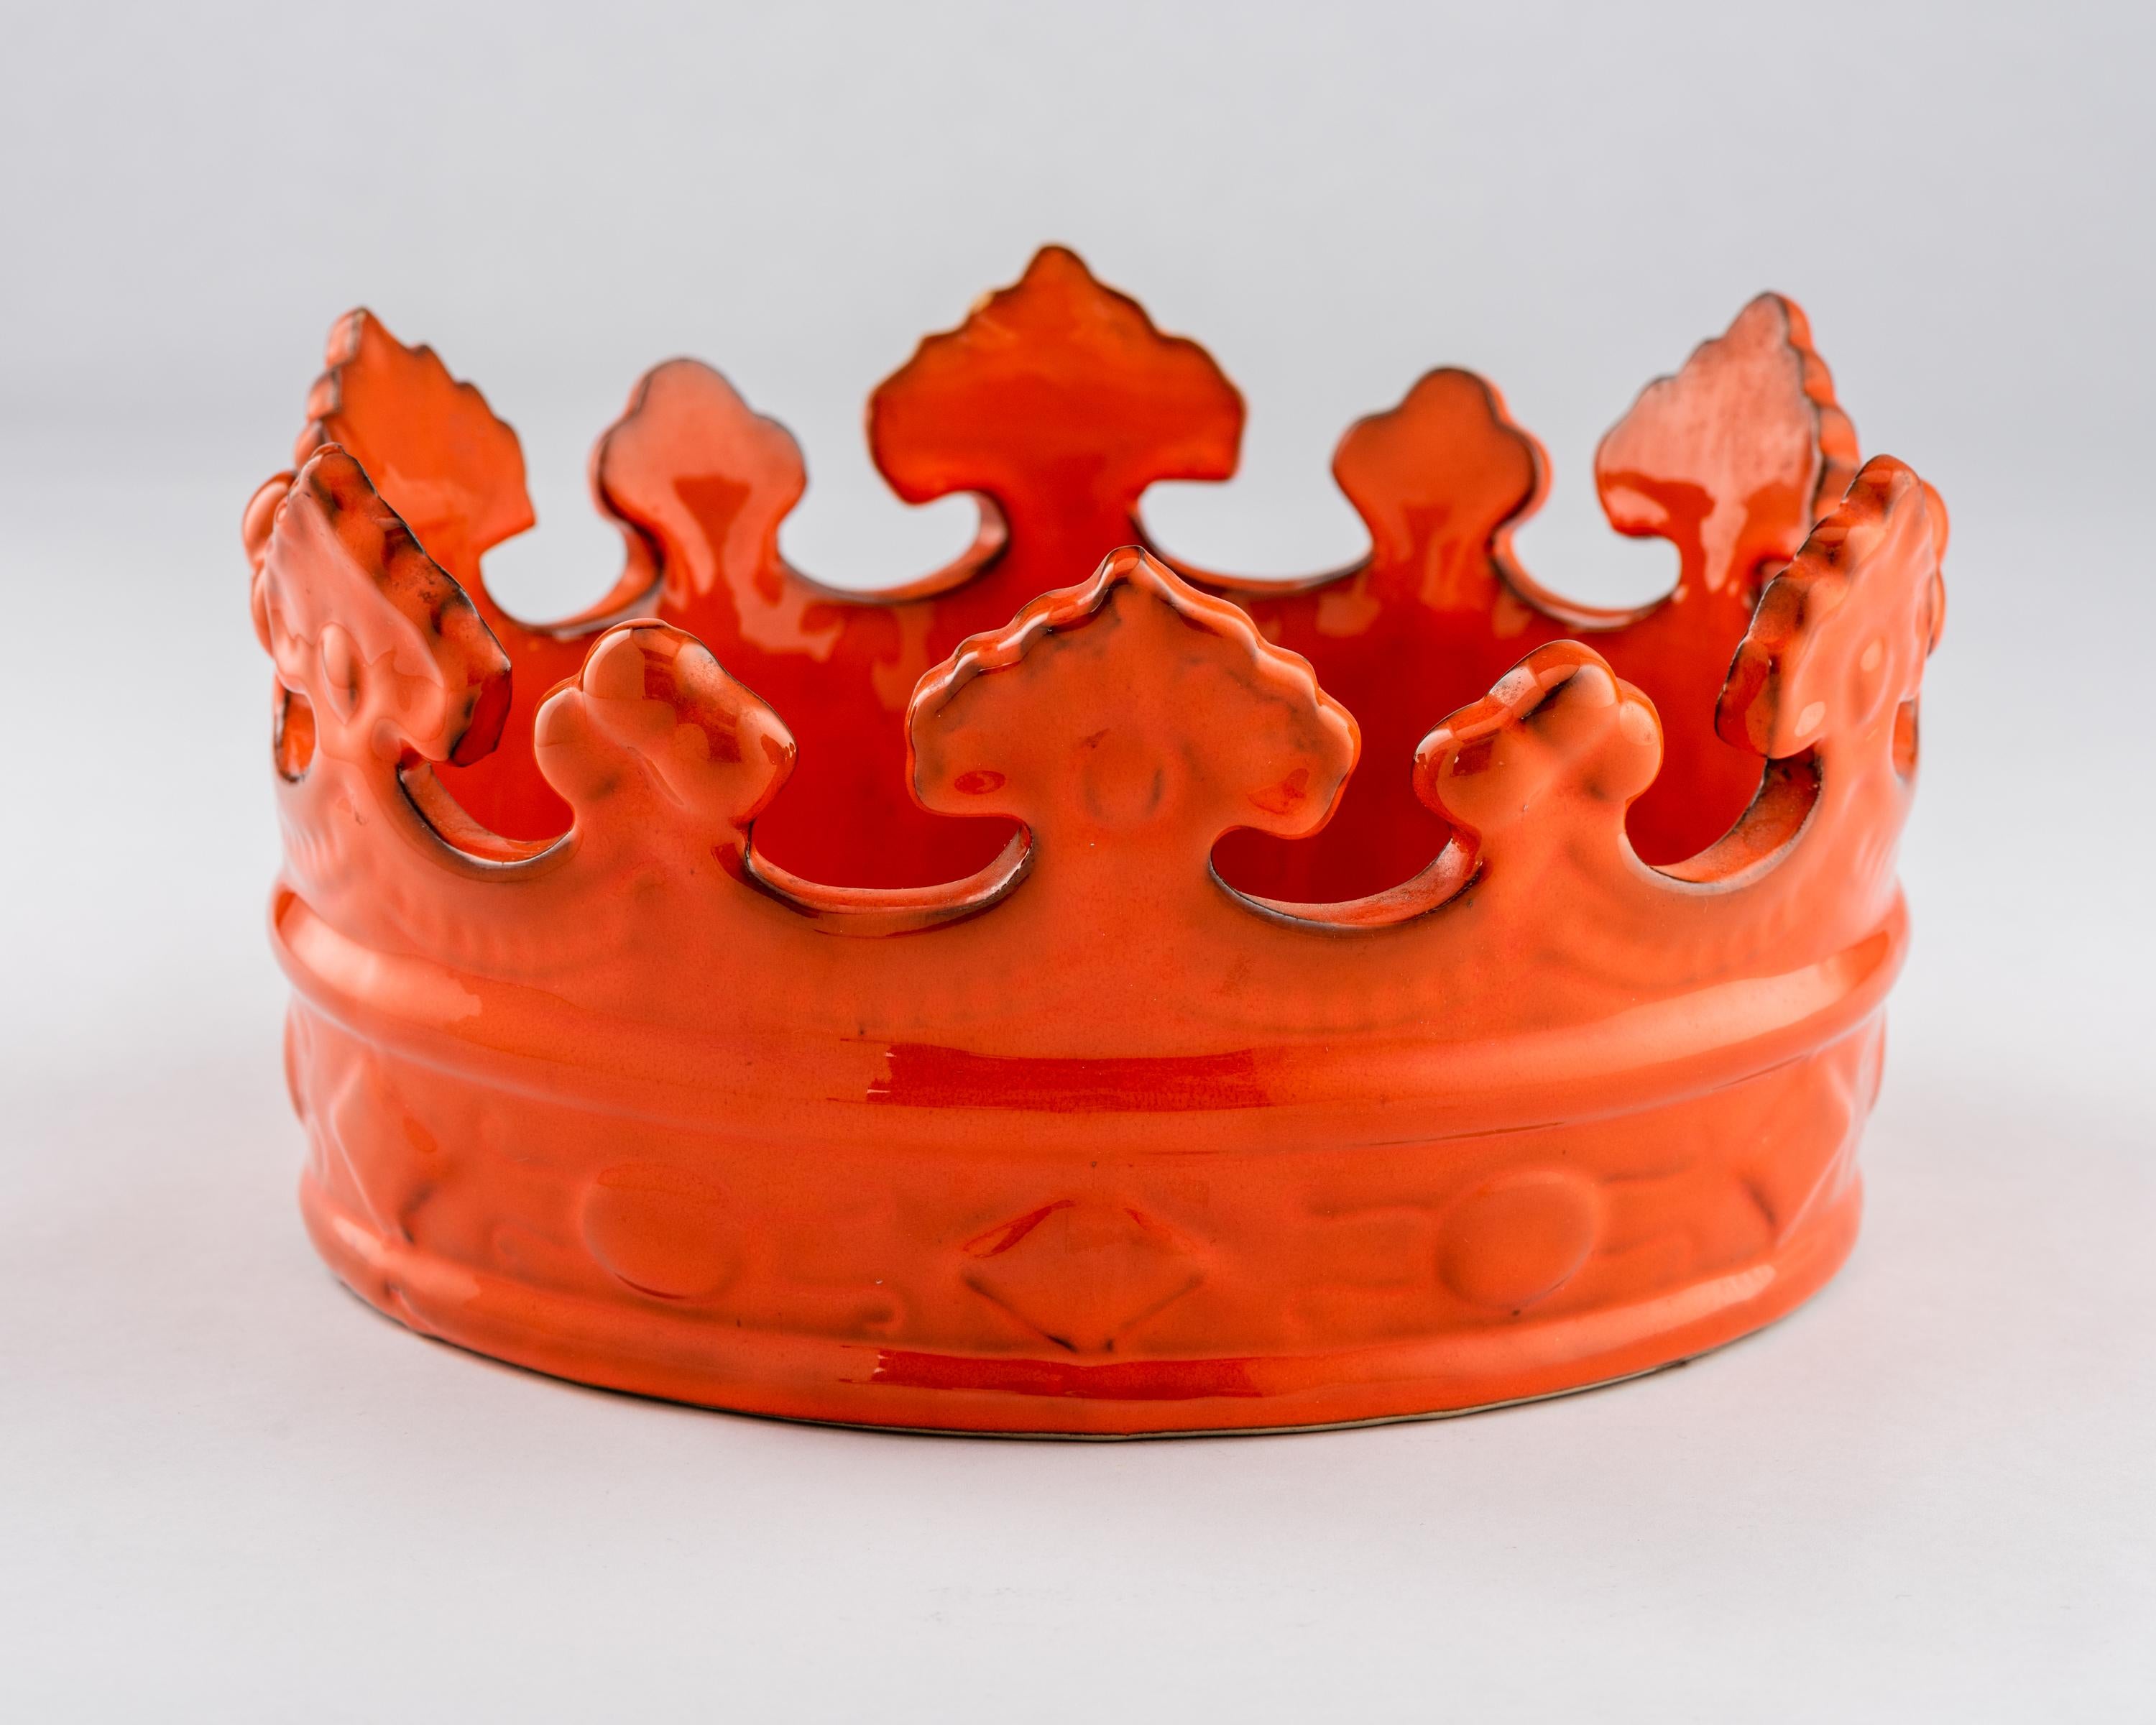 Italian crown, bowl, ceramic, orange, signed. Medium scale fun crown bowl glazed in orange and decorated with raised jewel motifs around the band. Signed on the underside: 